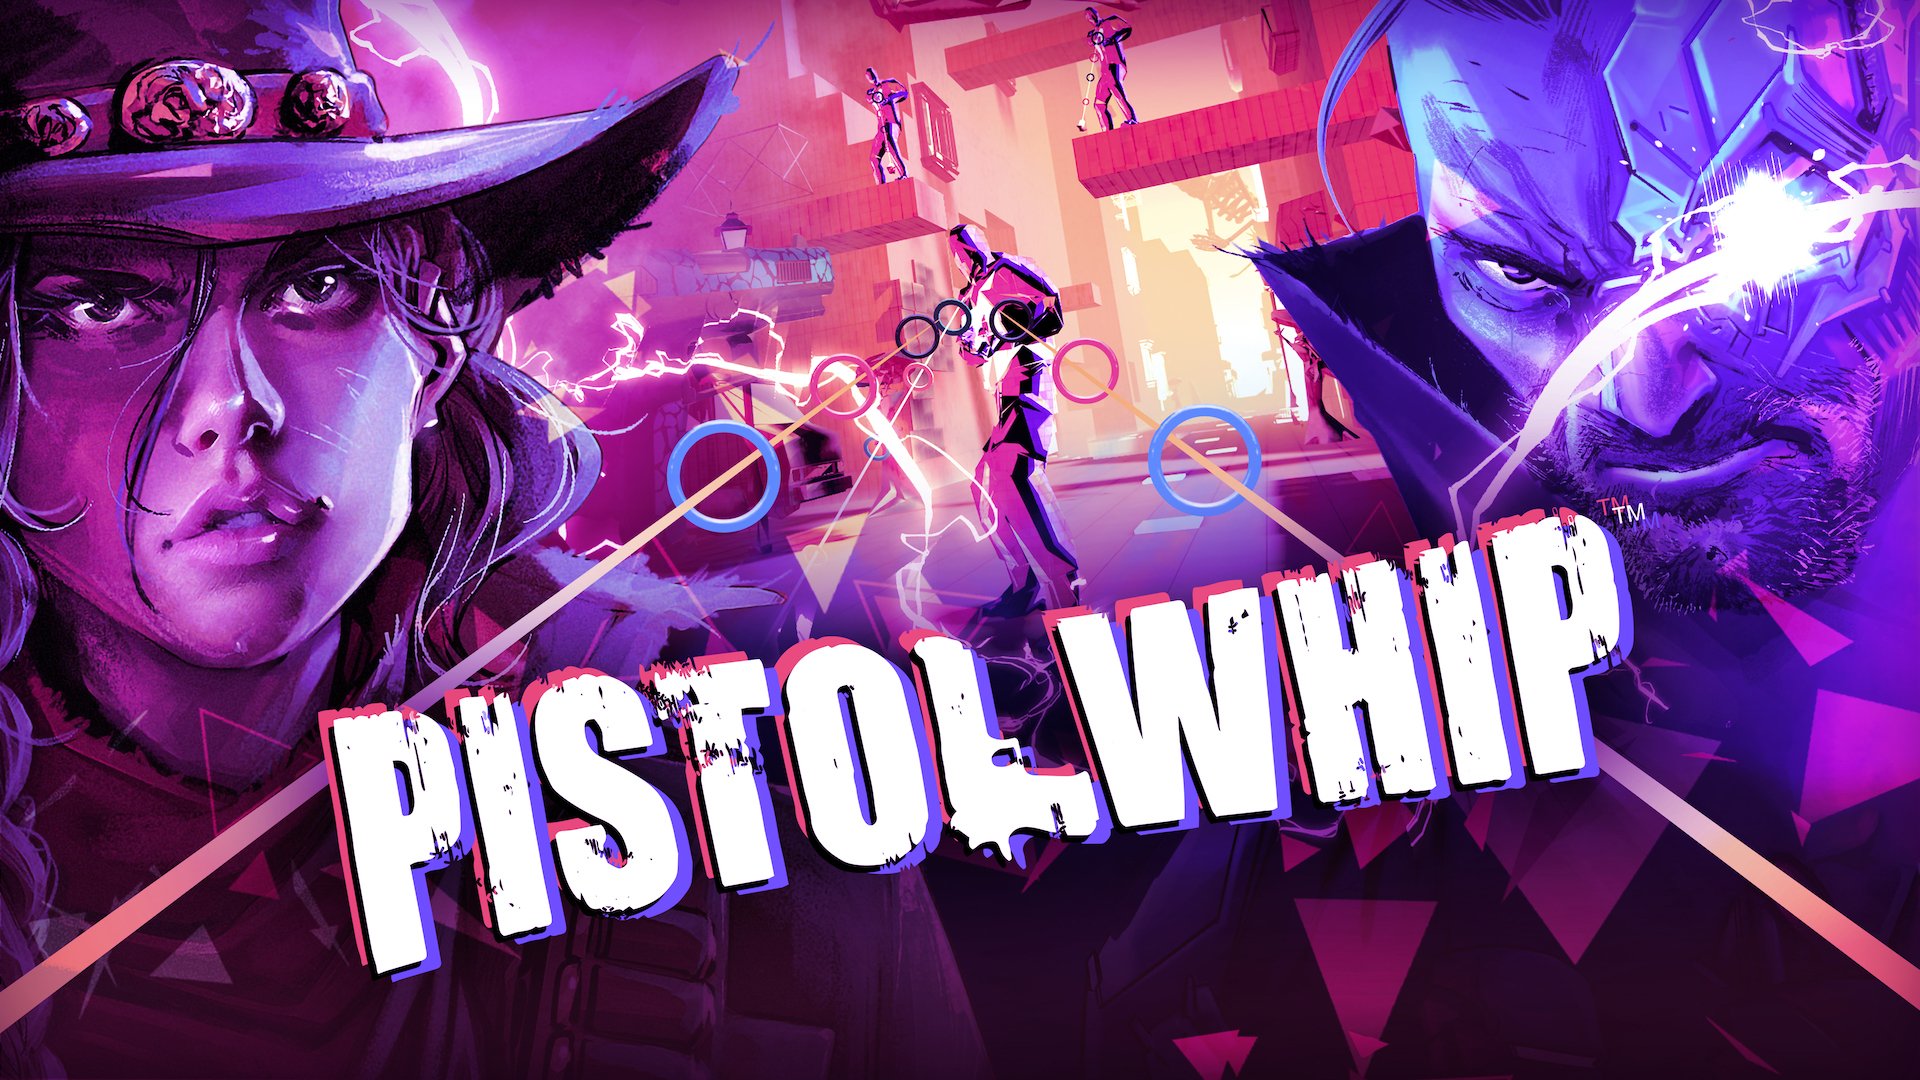 Pistol Whip “Holiday Update” brings many improvements